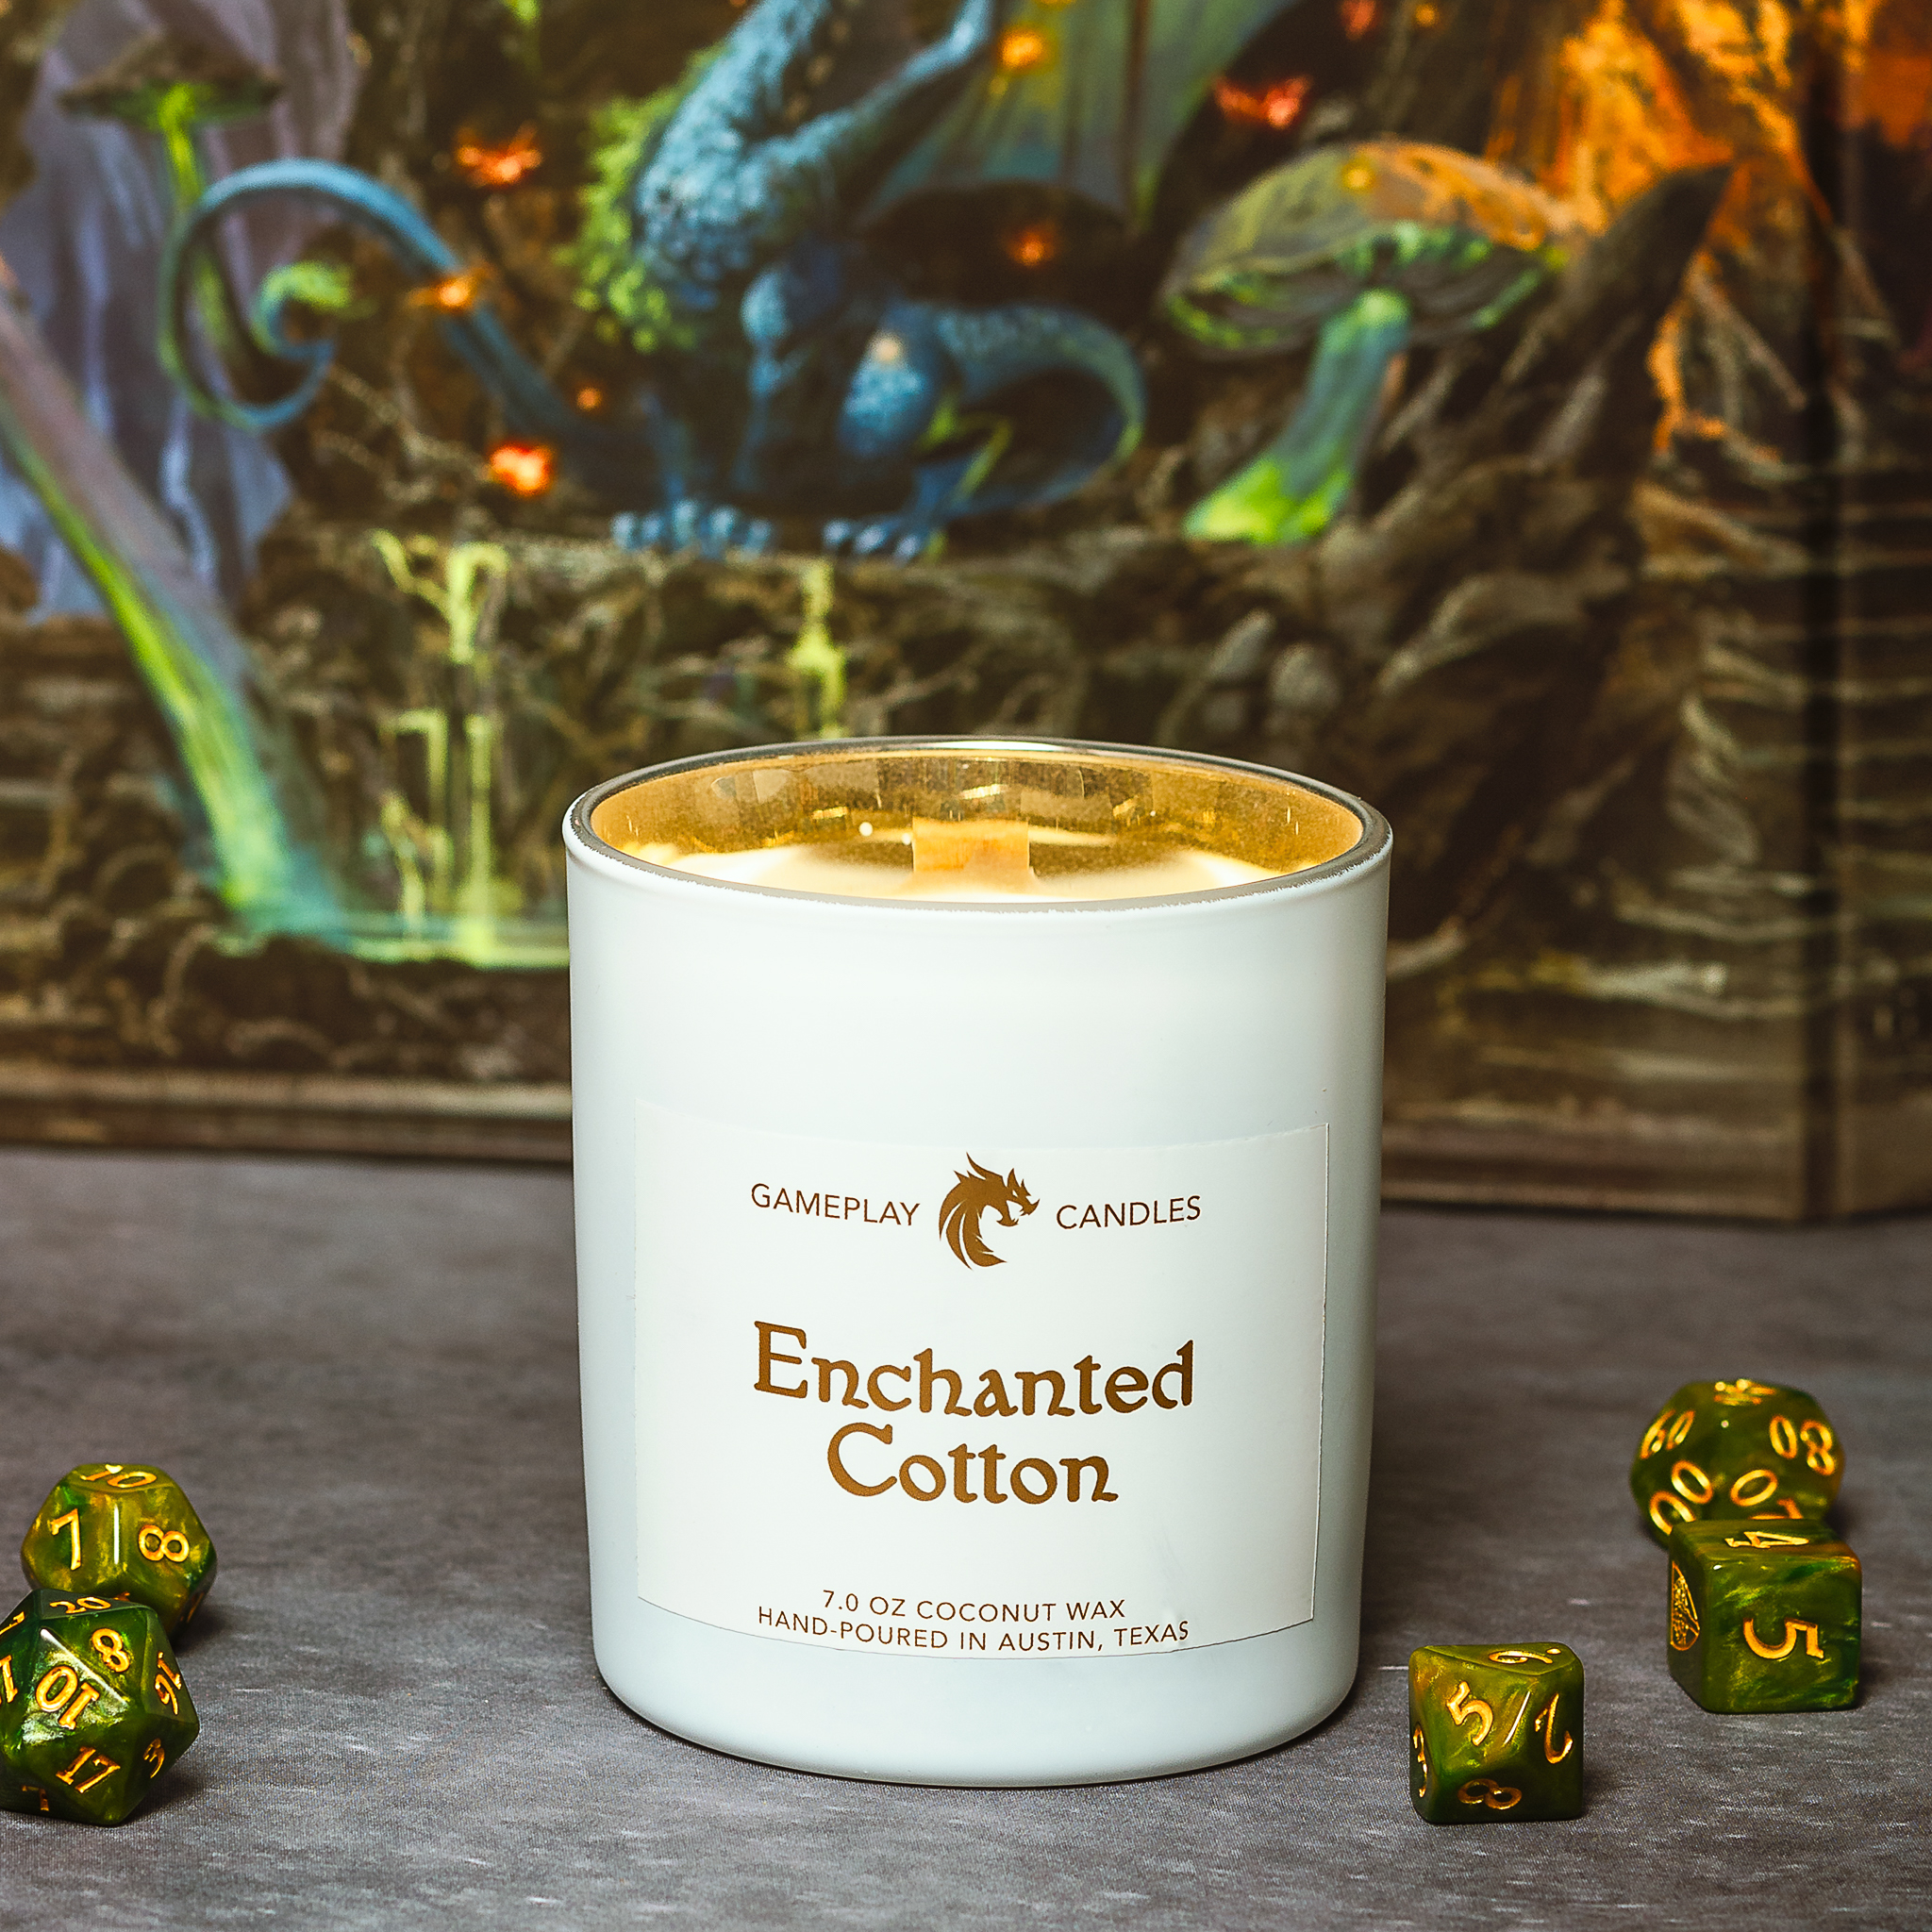 Bring about legendary adventures with our Dungeons and Dragons inspired candles!